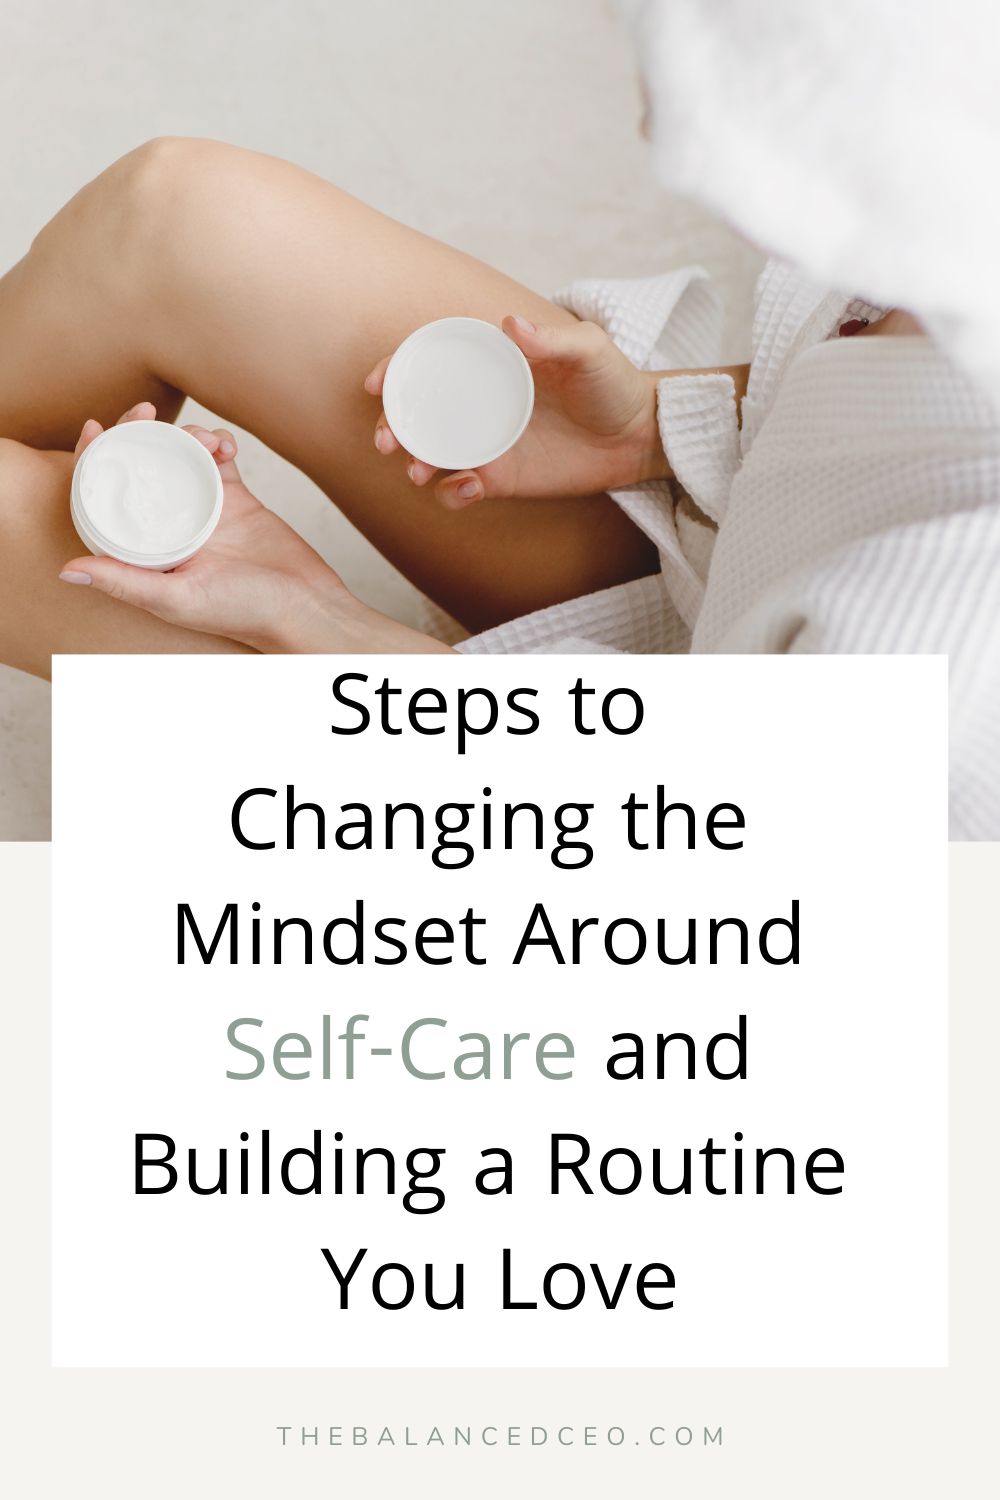 From Chore to Ritual: Steps to Changing the Mindset Around Self-Care and Building a Routine You Love